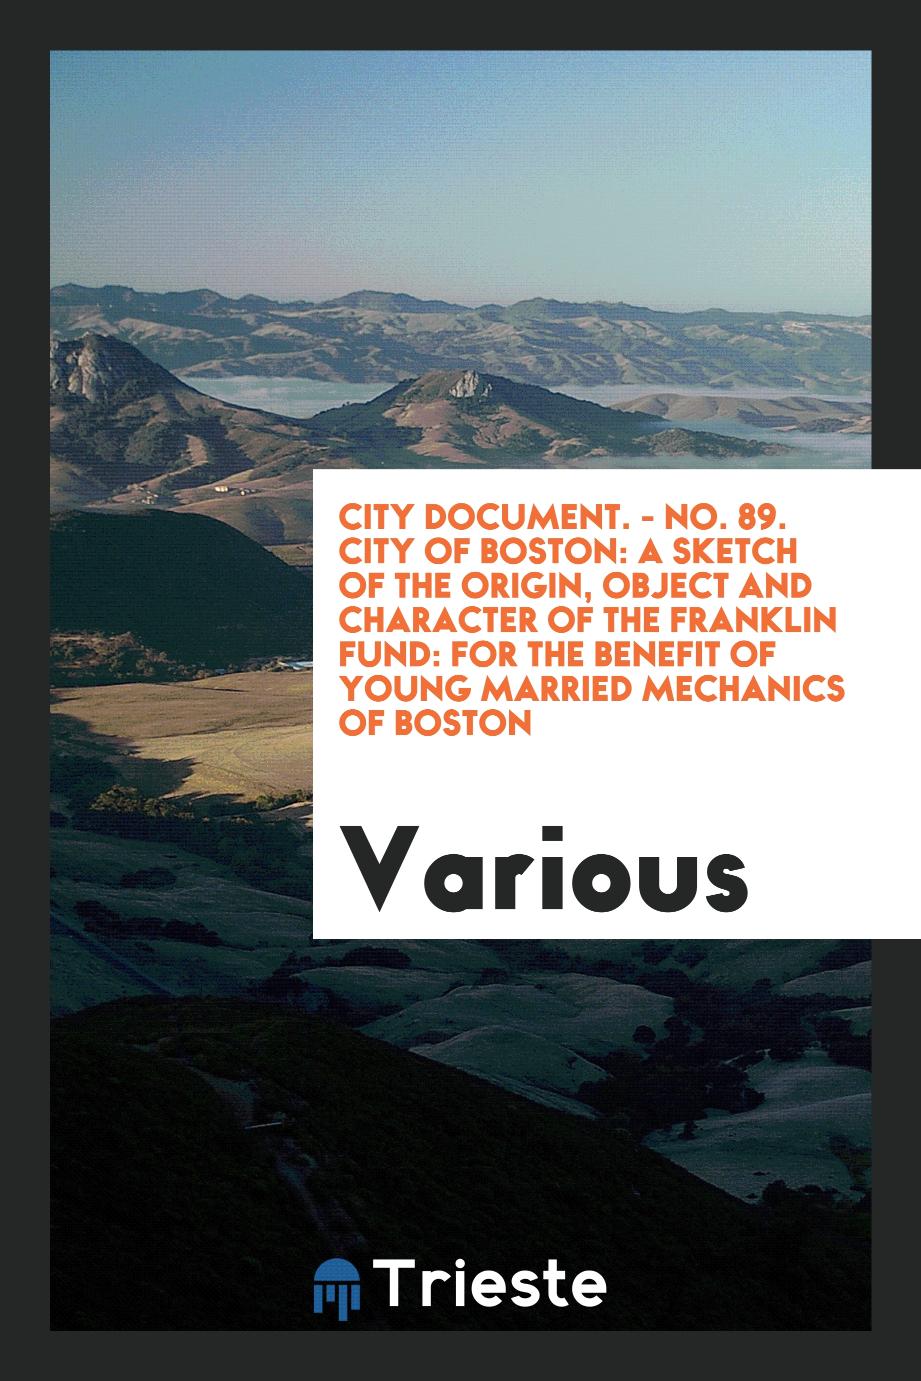 City Document. - No. 89. City of Boston: A Sketch of the Origin, Object and Character of the Franklin Fund: for the benefit of young married mechanics of Boston